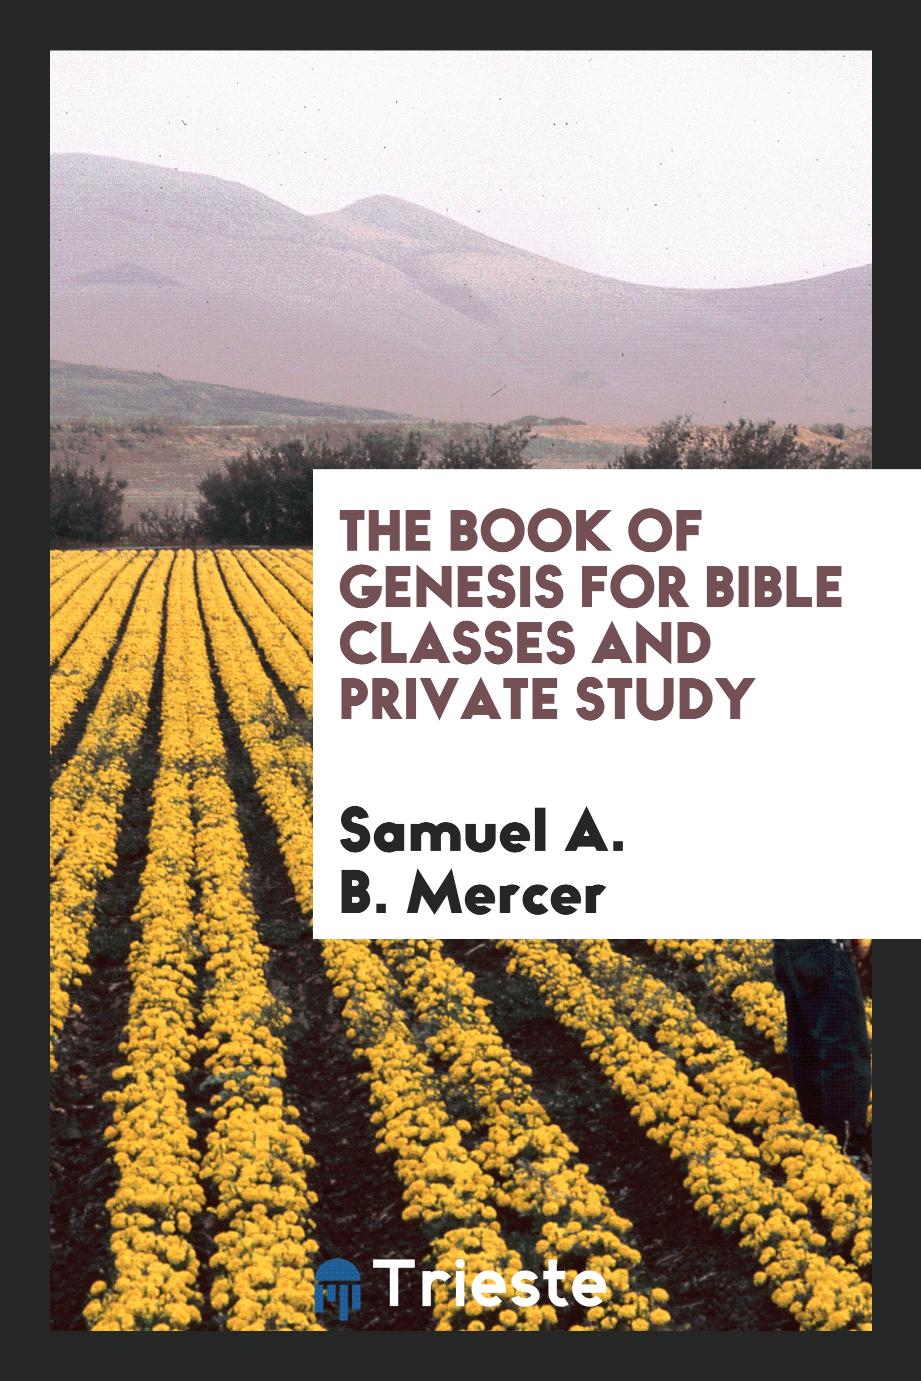 The book of Genesis for Bible classes and private study